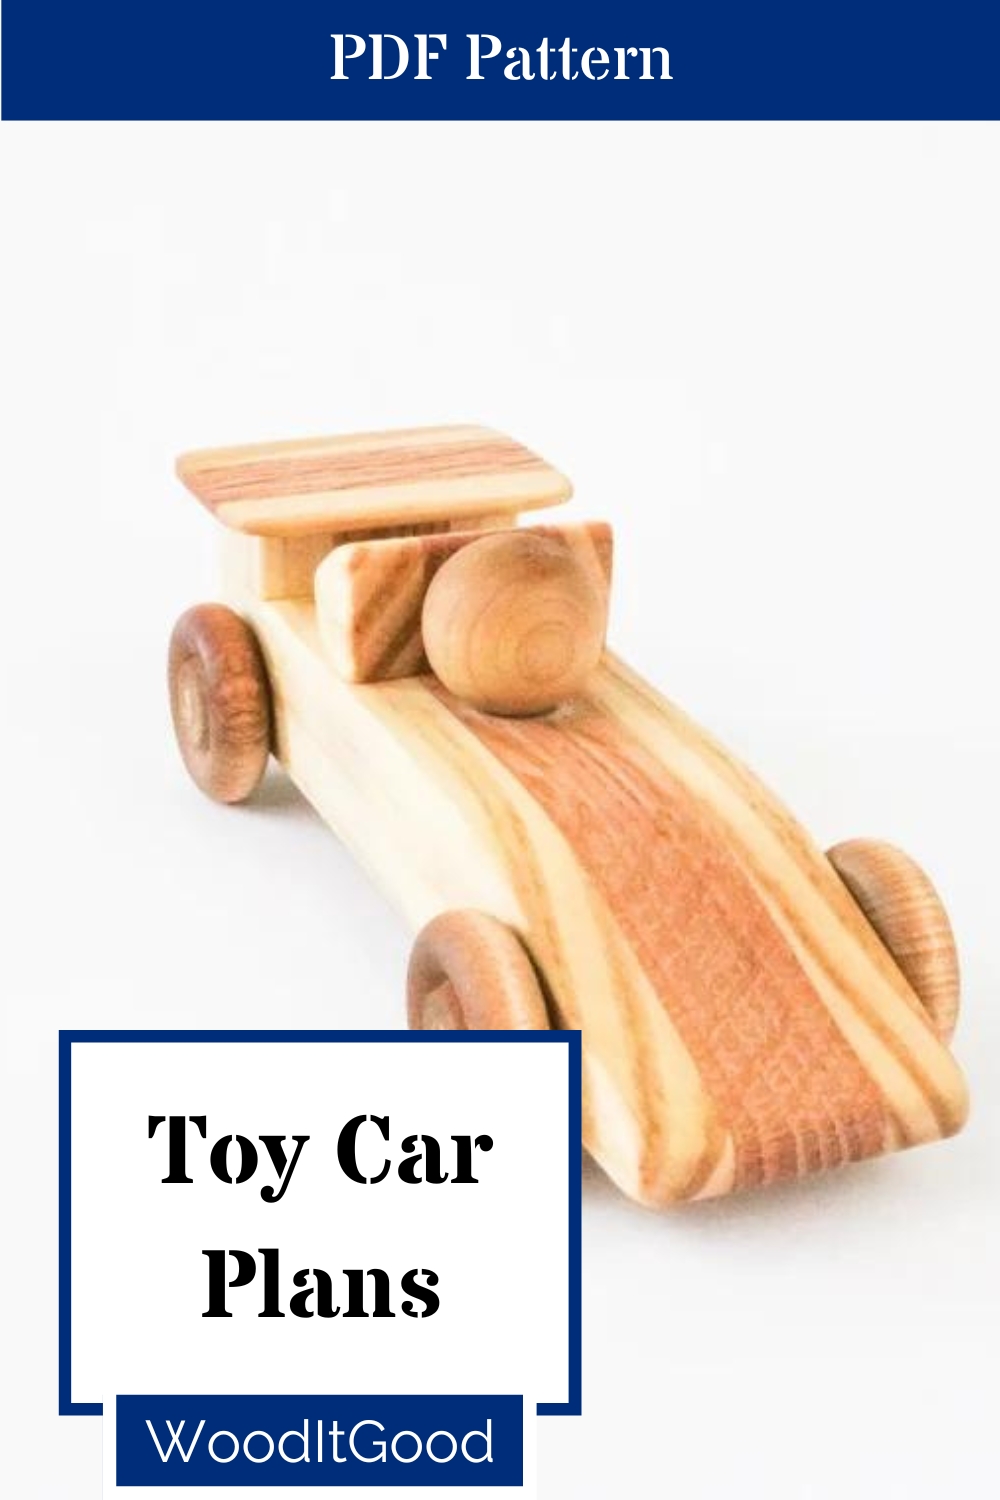 Toy car plans you can build